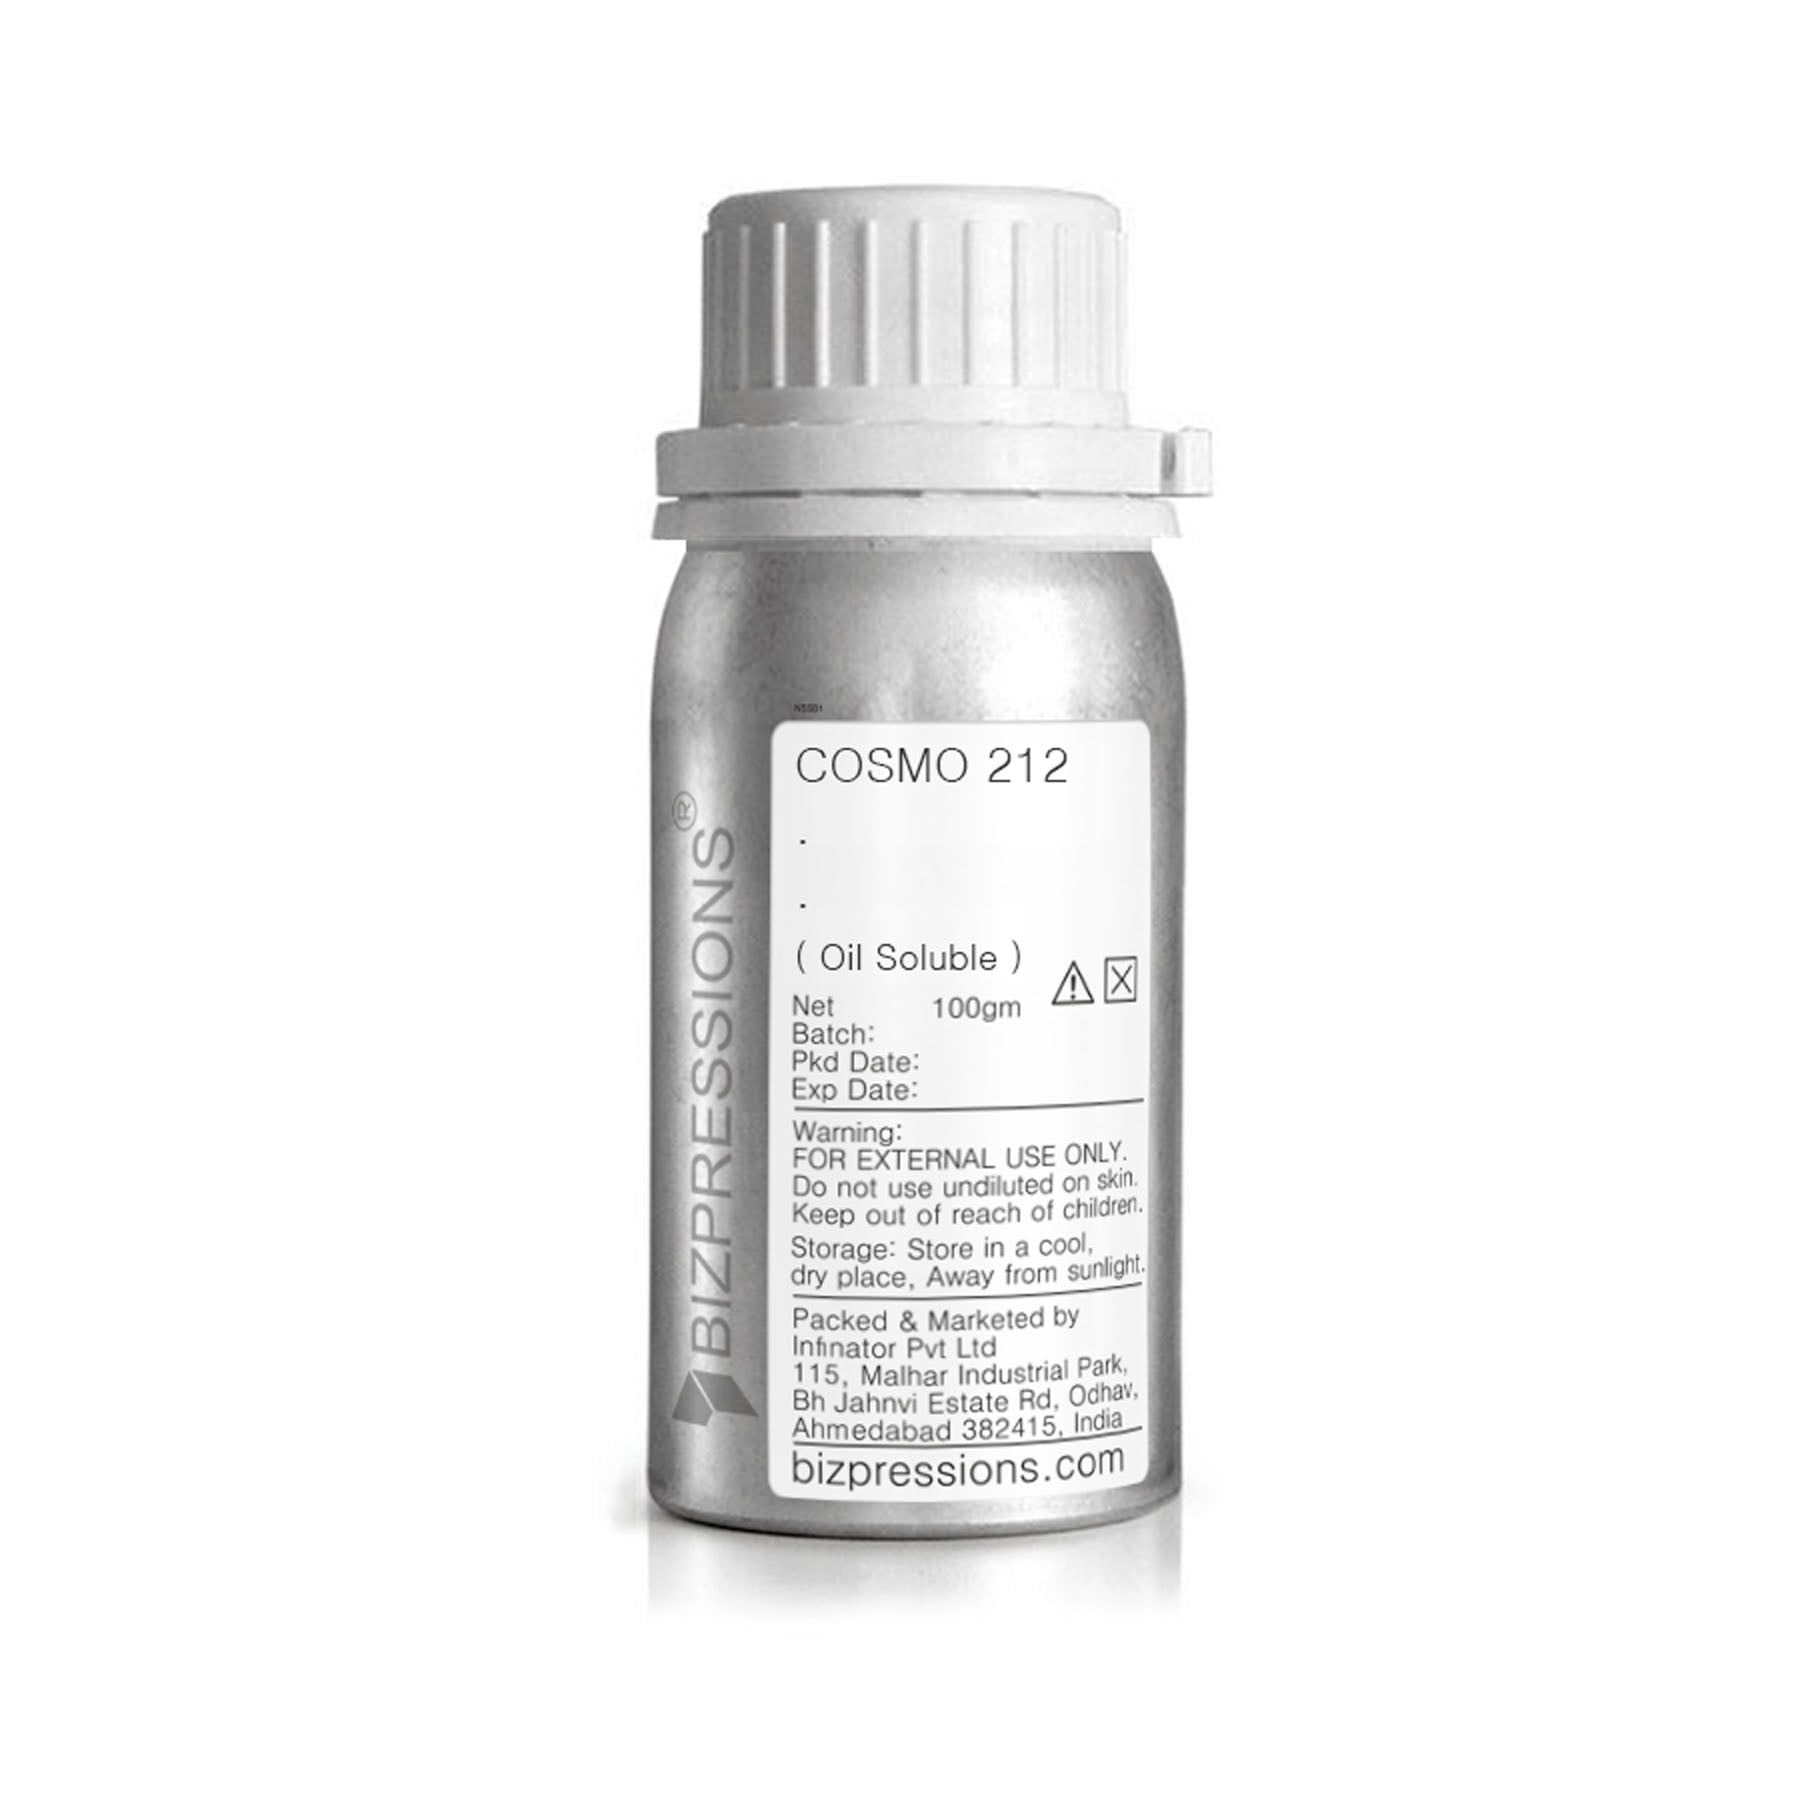 COSMO 212 - Fragrance ( Oil Soluble ) - 100 gm